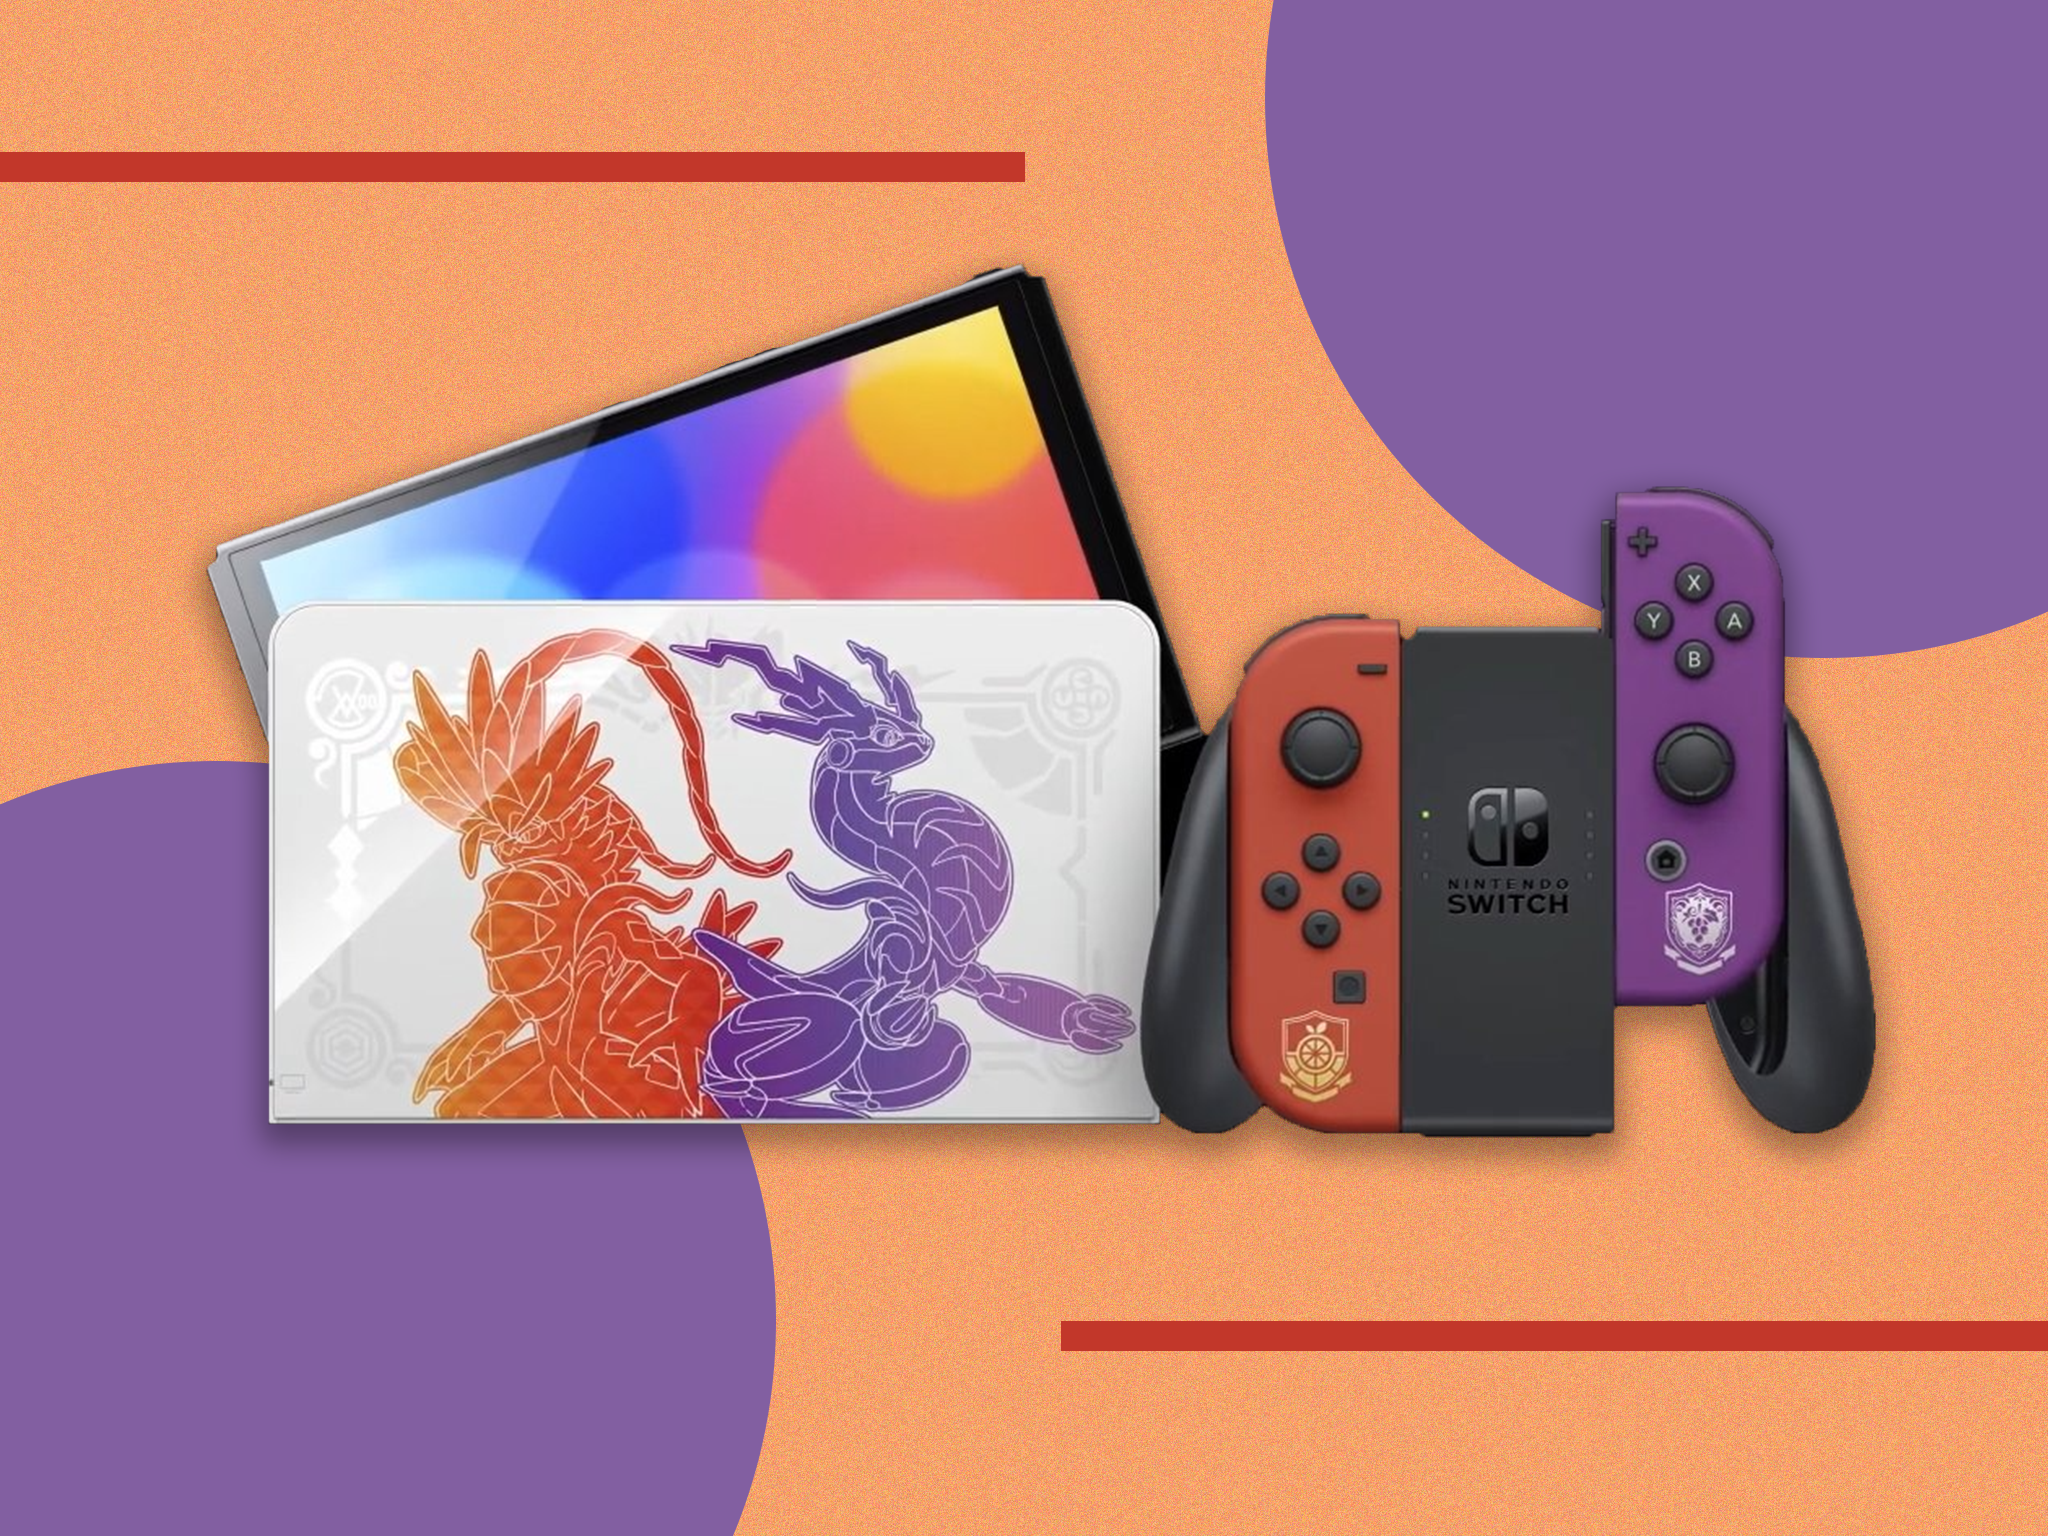 Nintendo Switch Pokémon Edition: Release Date and More Info